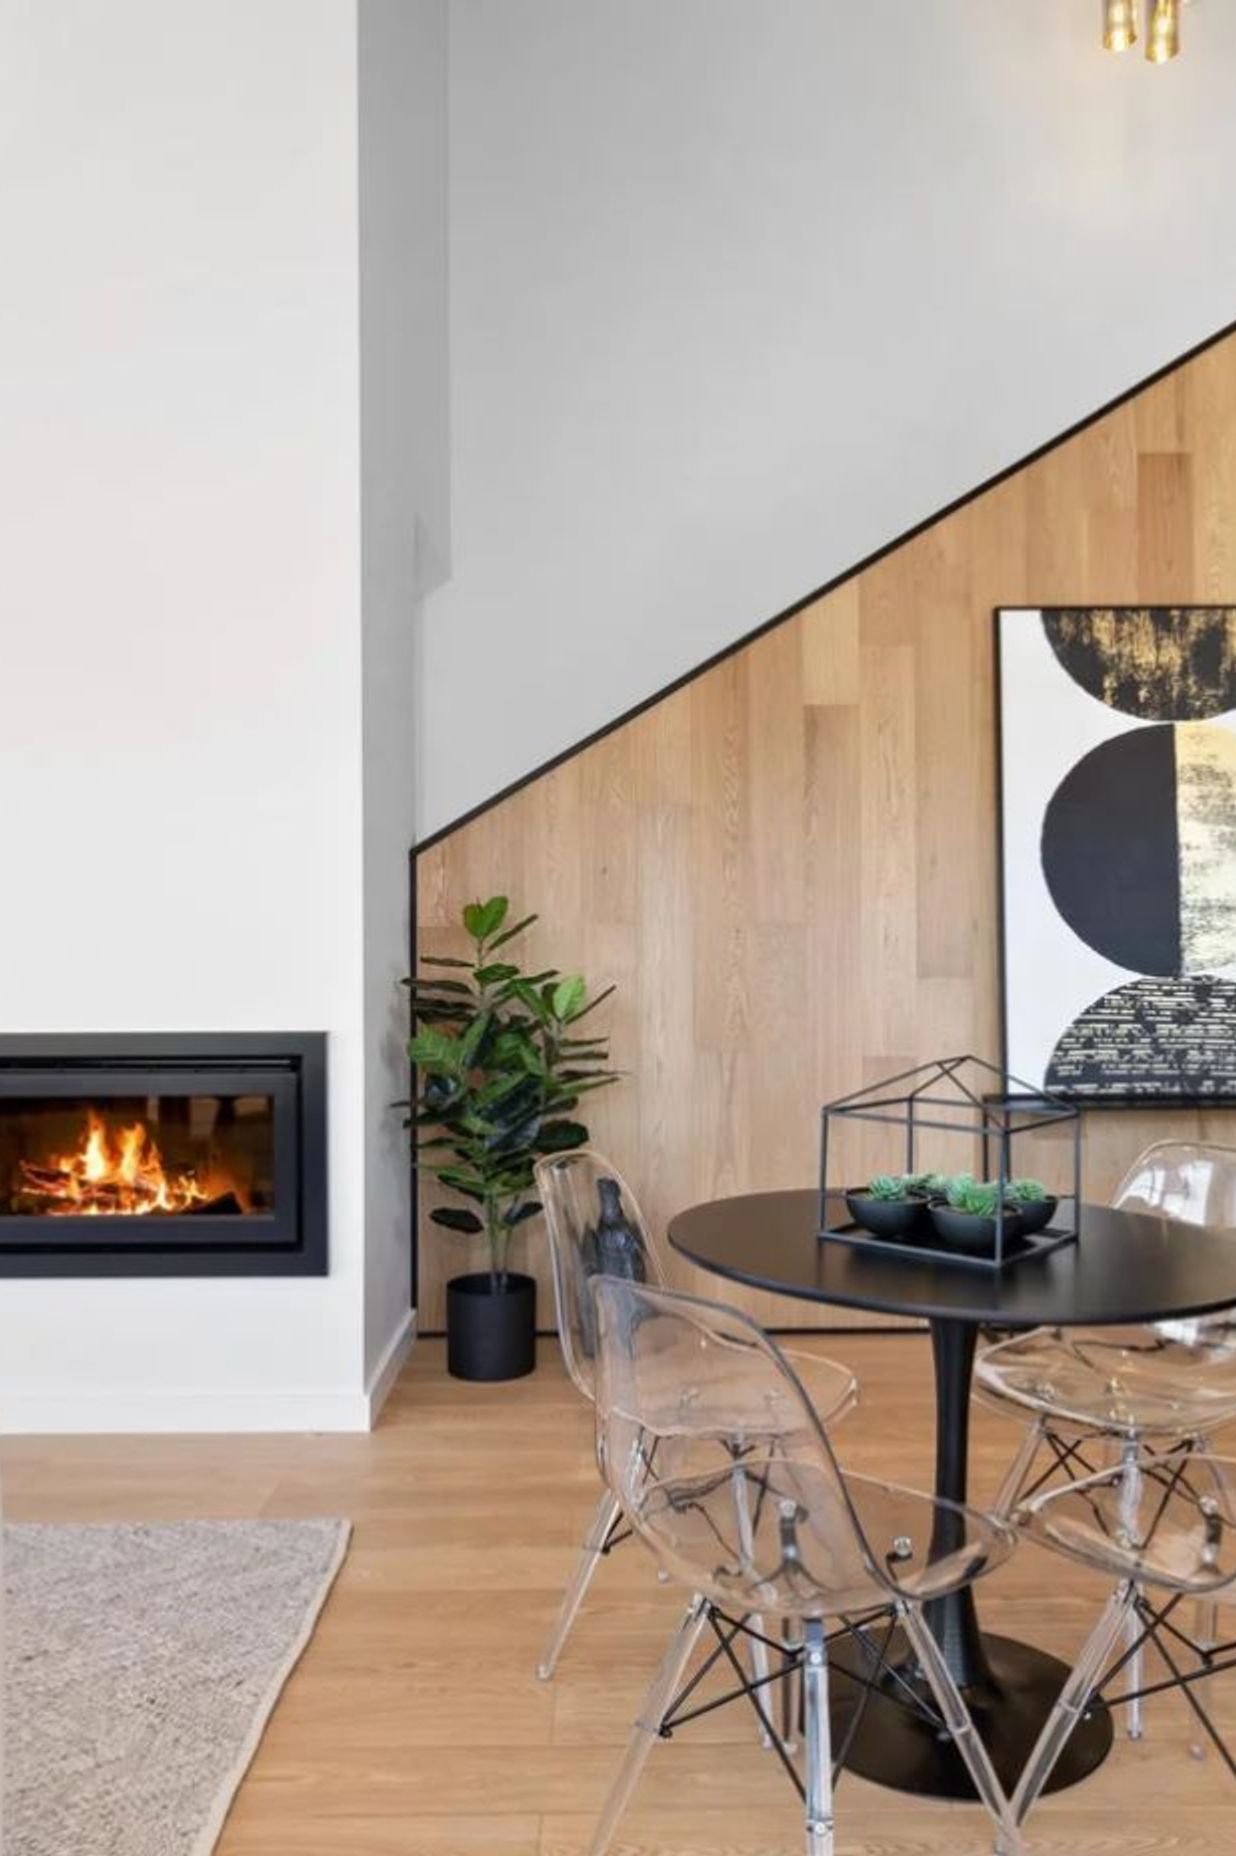 Timber feature wall and cosy Escea gas fireplace.